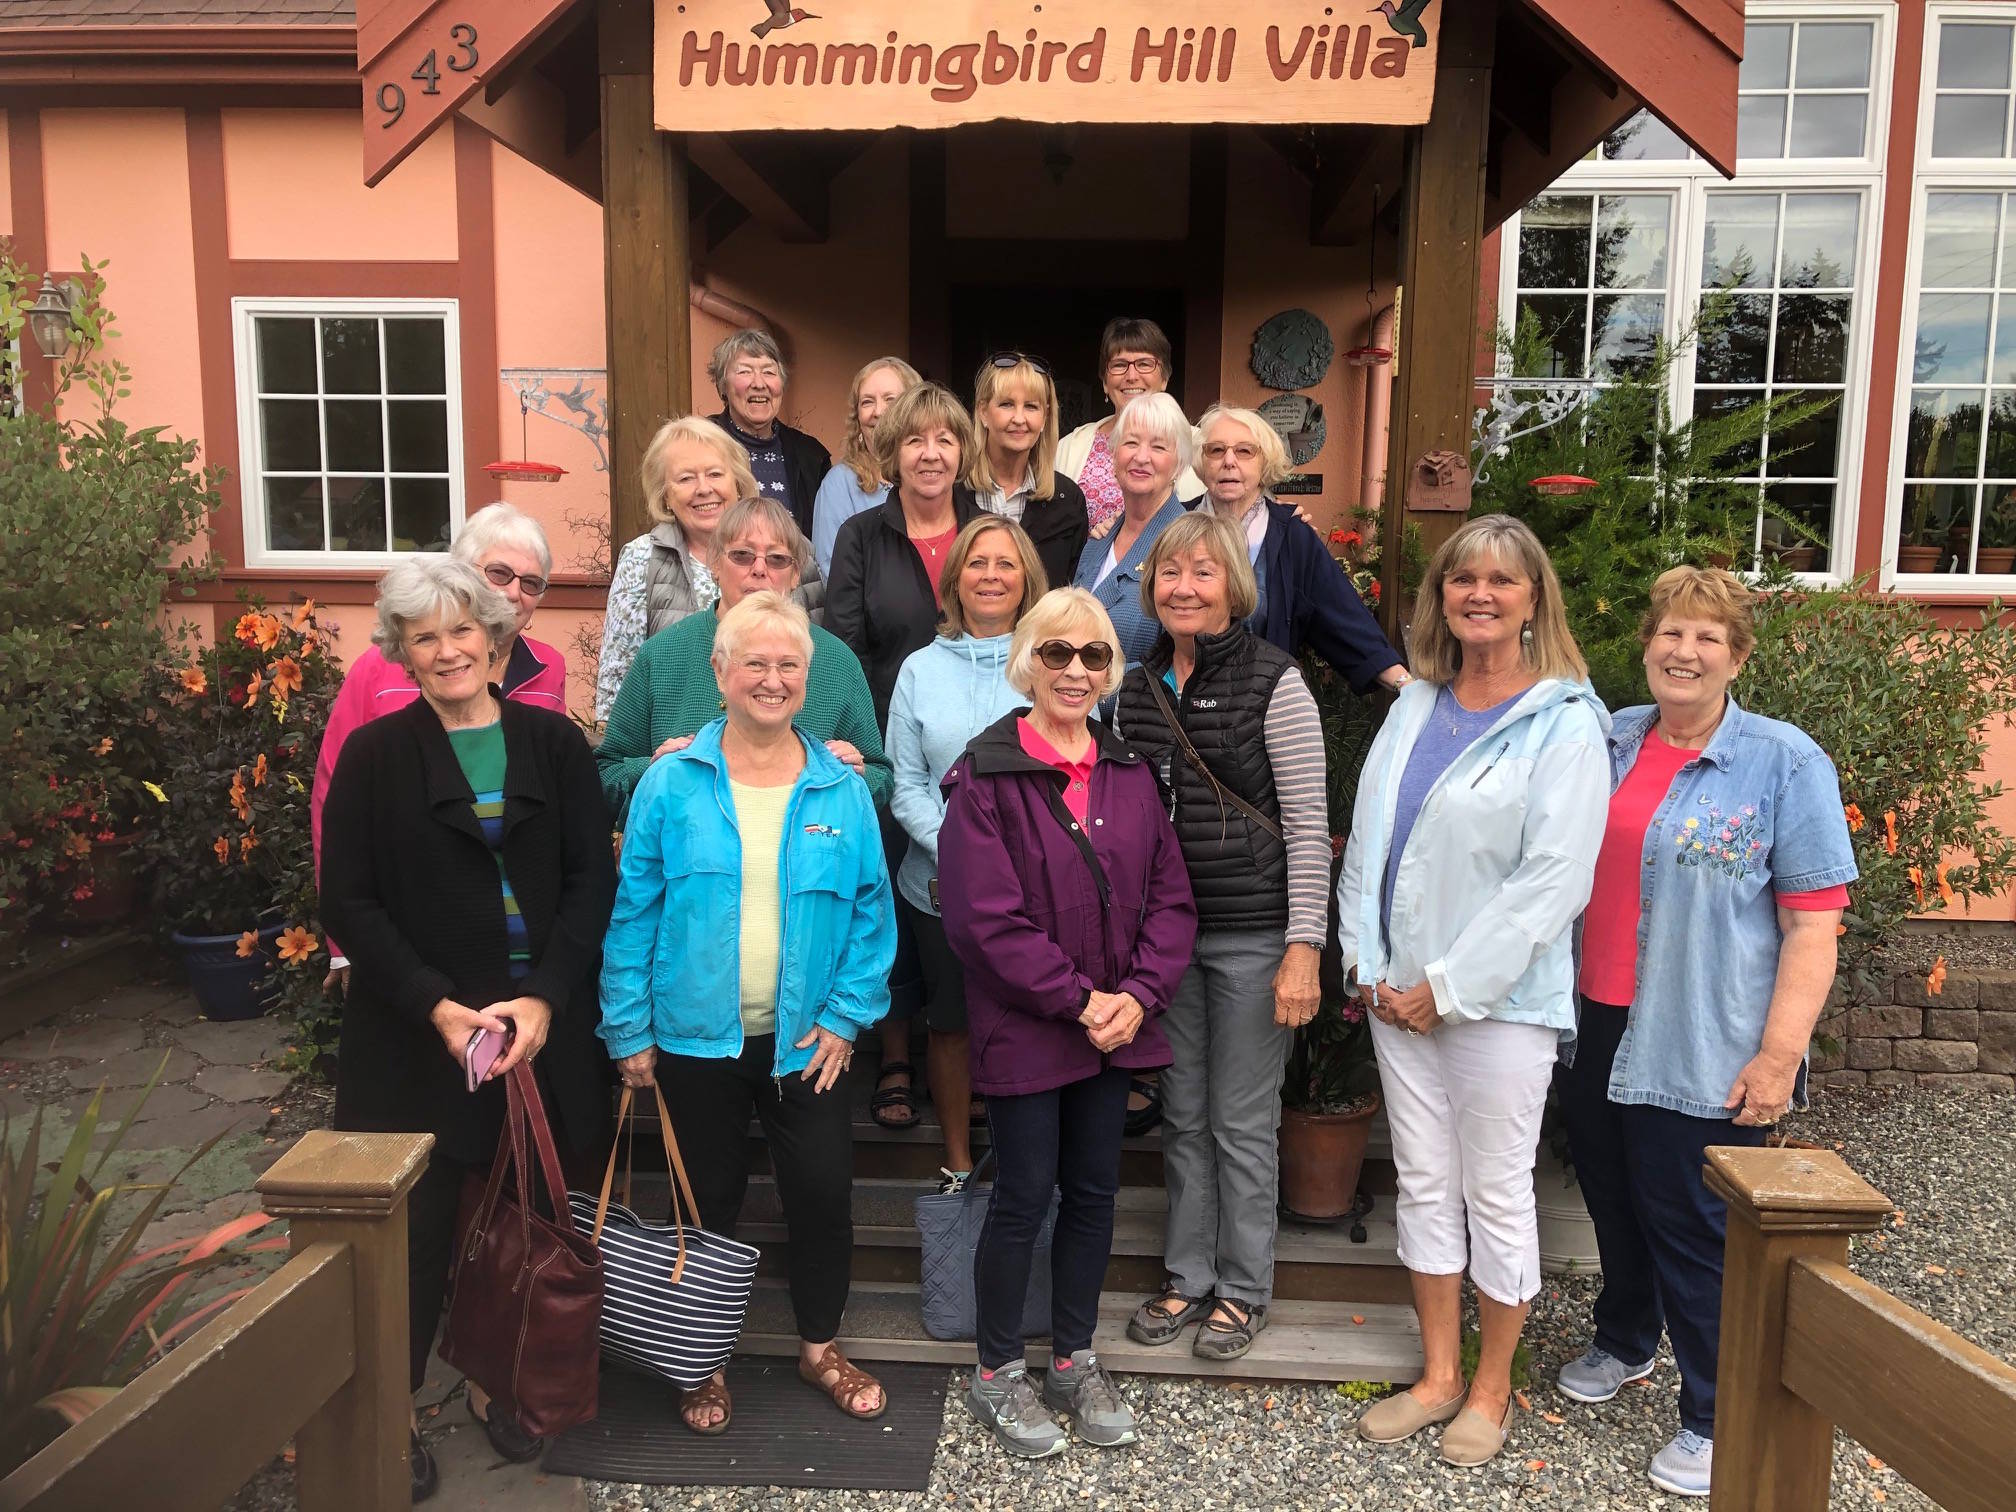 The members of the South Whidbey Garden Club pose for a photo on Annette Barca’s stairs and deck a our tour of The Hummingbird Hill Garden in Greenbank. Photo submitted